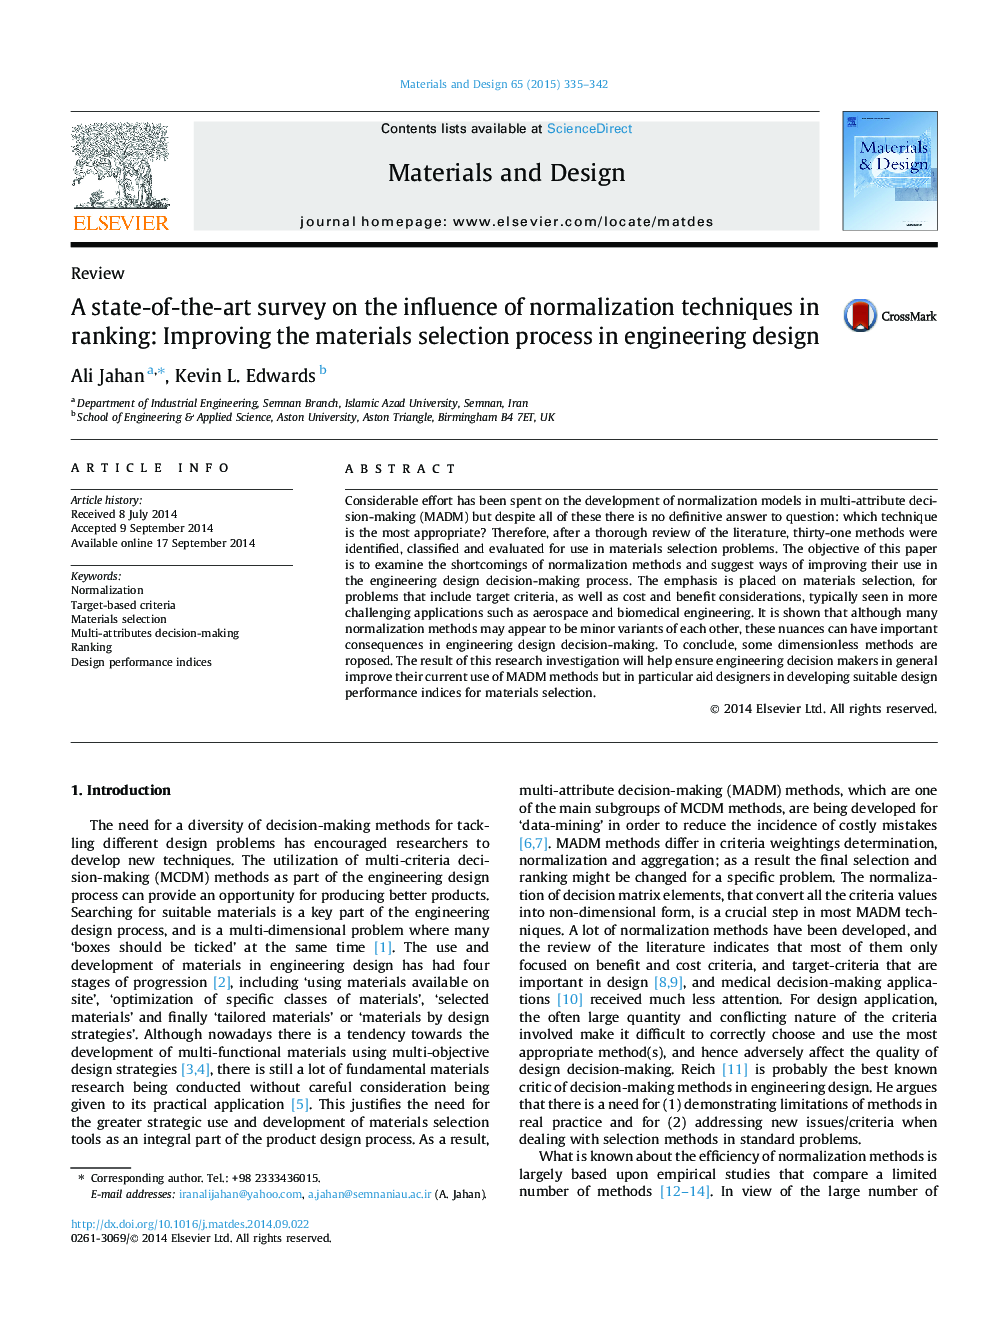 A state-of-the-art survey on the influence of normalization techniques in ranking: Improving the materials selection process in engineering design